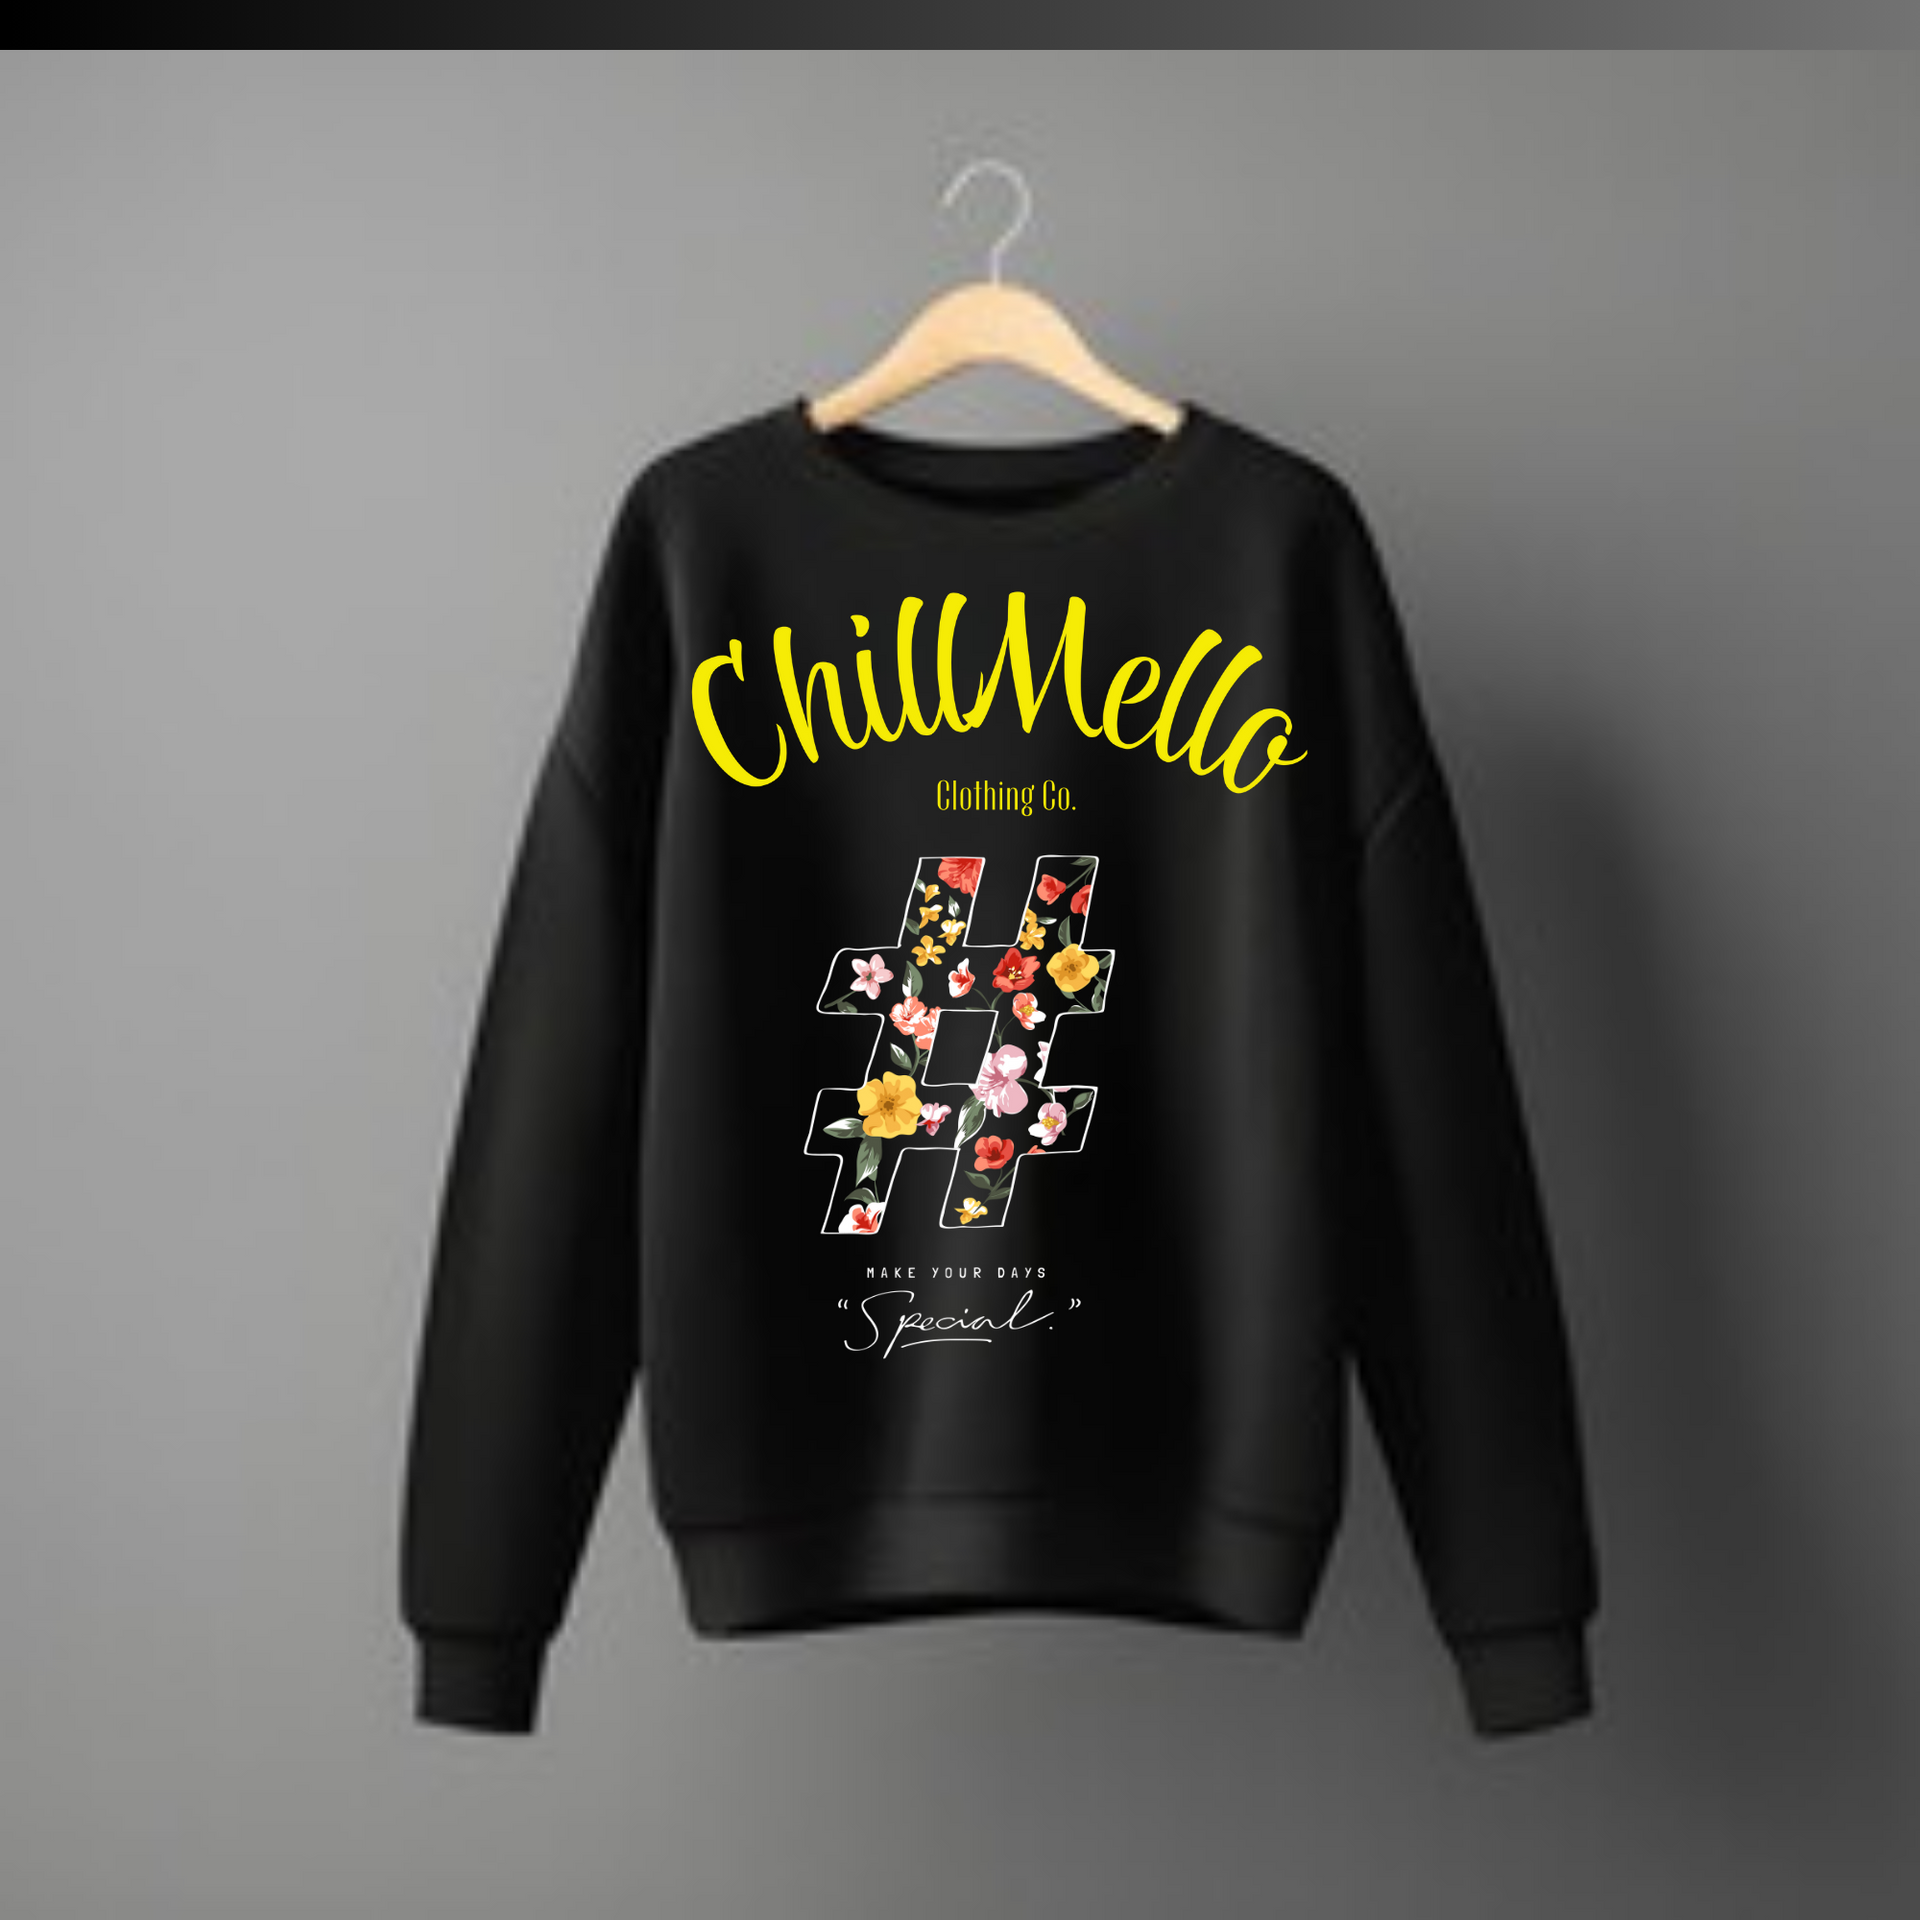 Chill Clothing Co